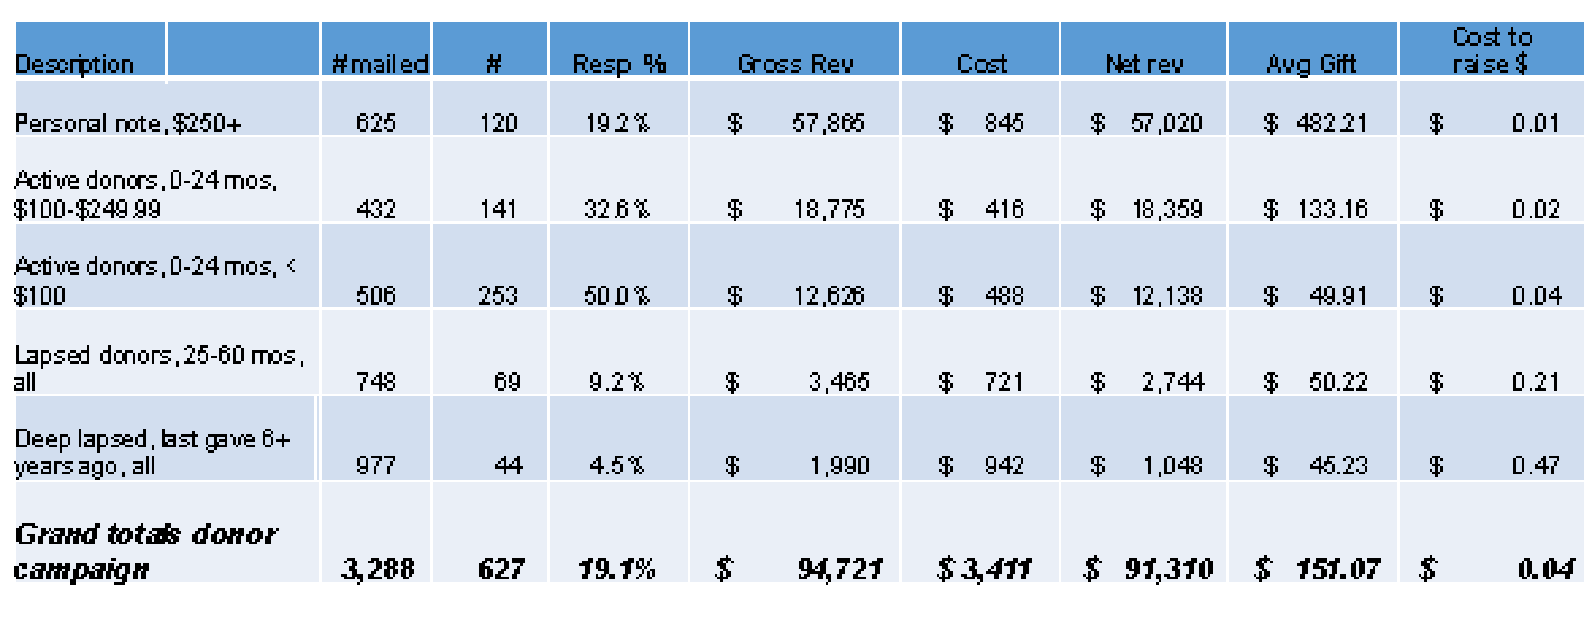 Overall cost to raise a dollar